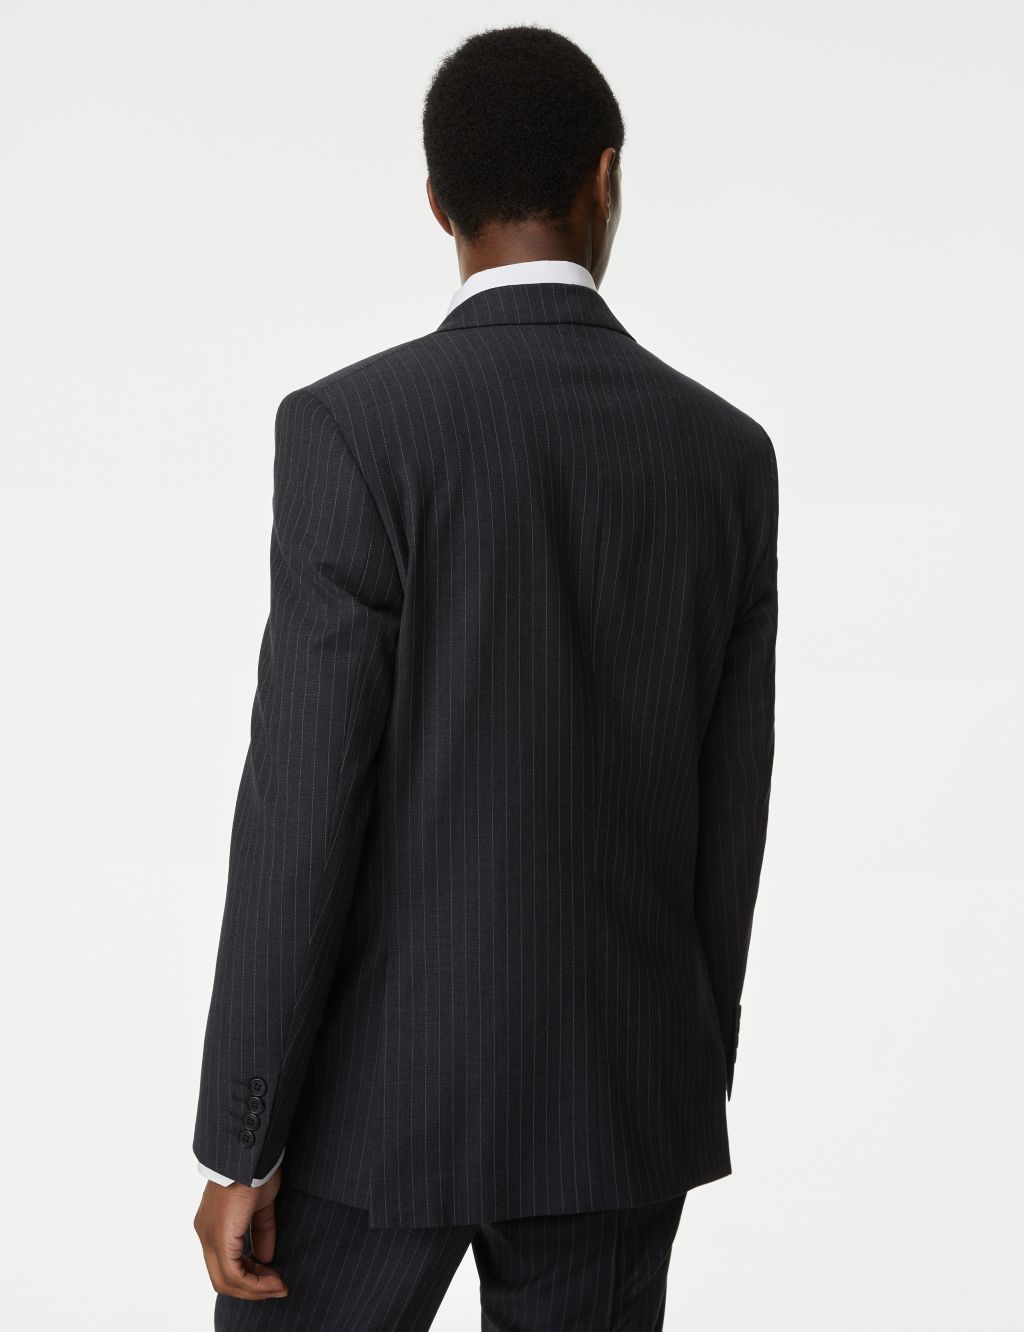 The Ultimate Tailored Fit Pinstripe Suit image 3